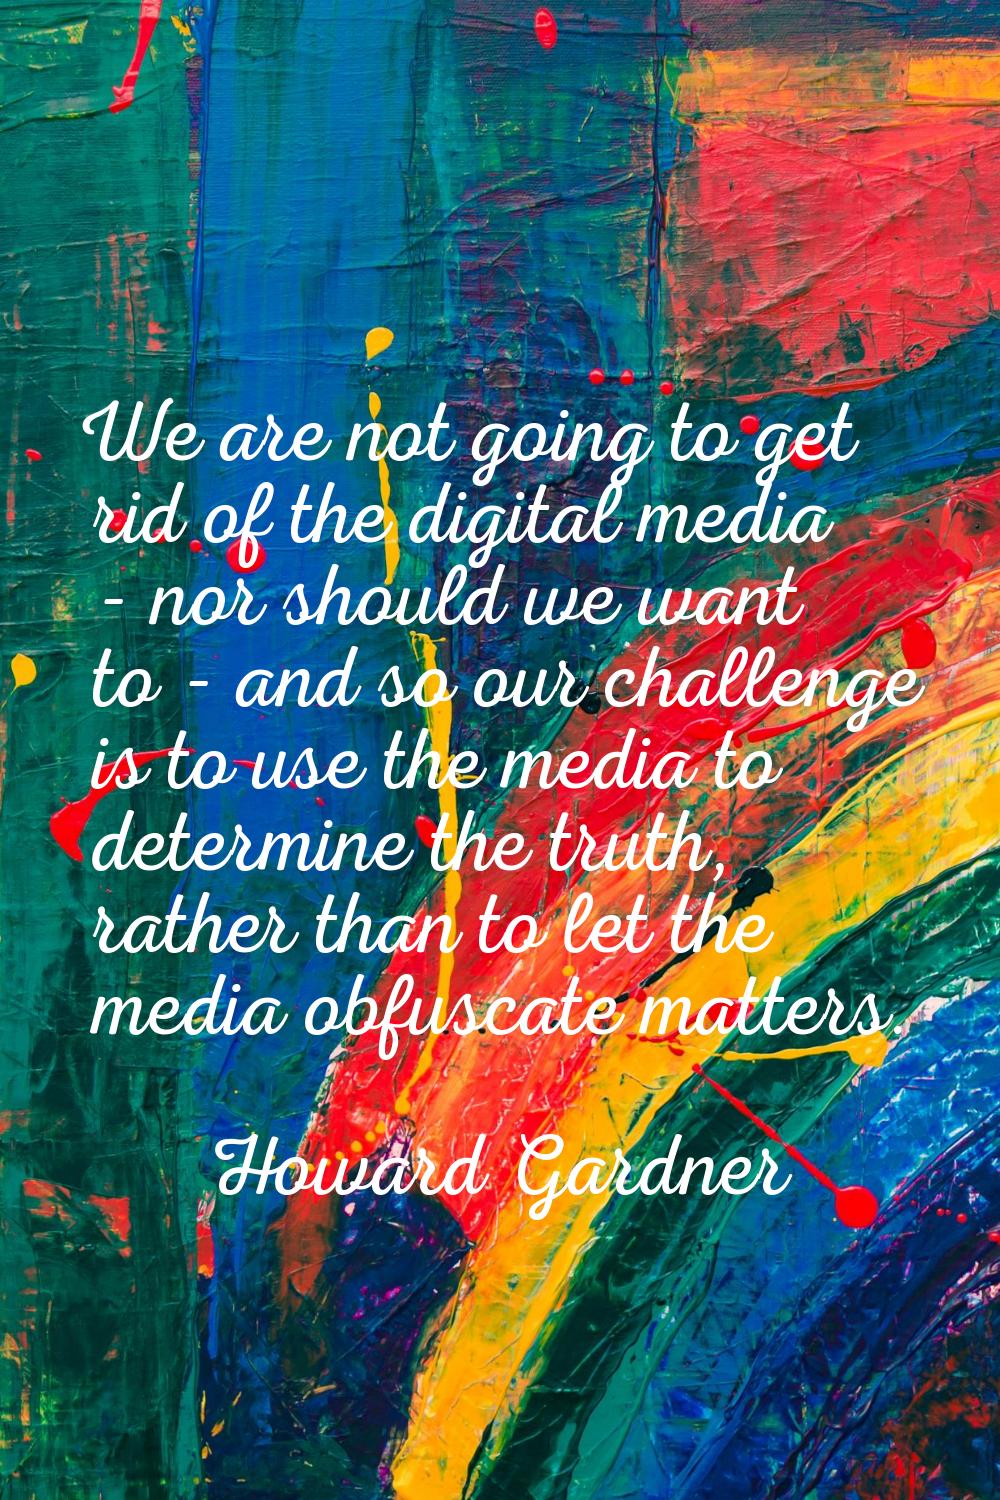 We are not going to get rid of the digital media - nor should we want to - and so our challenge is 